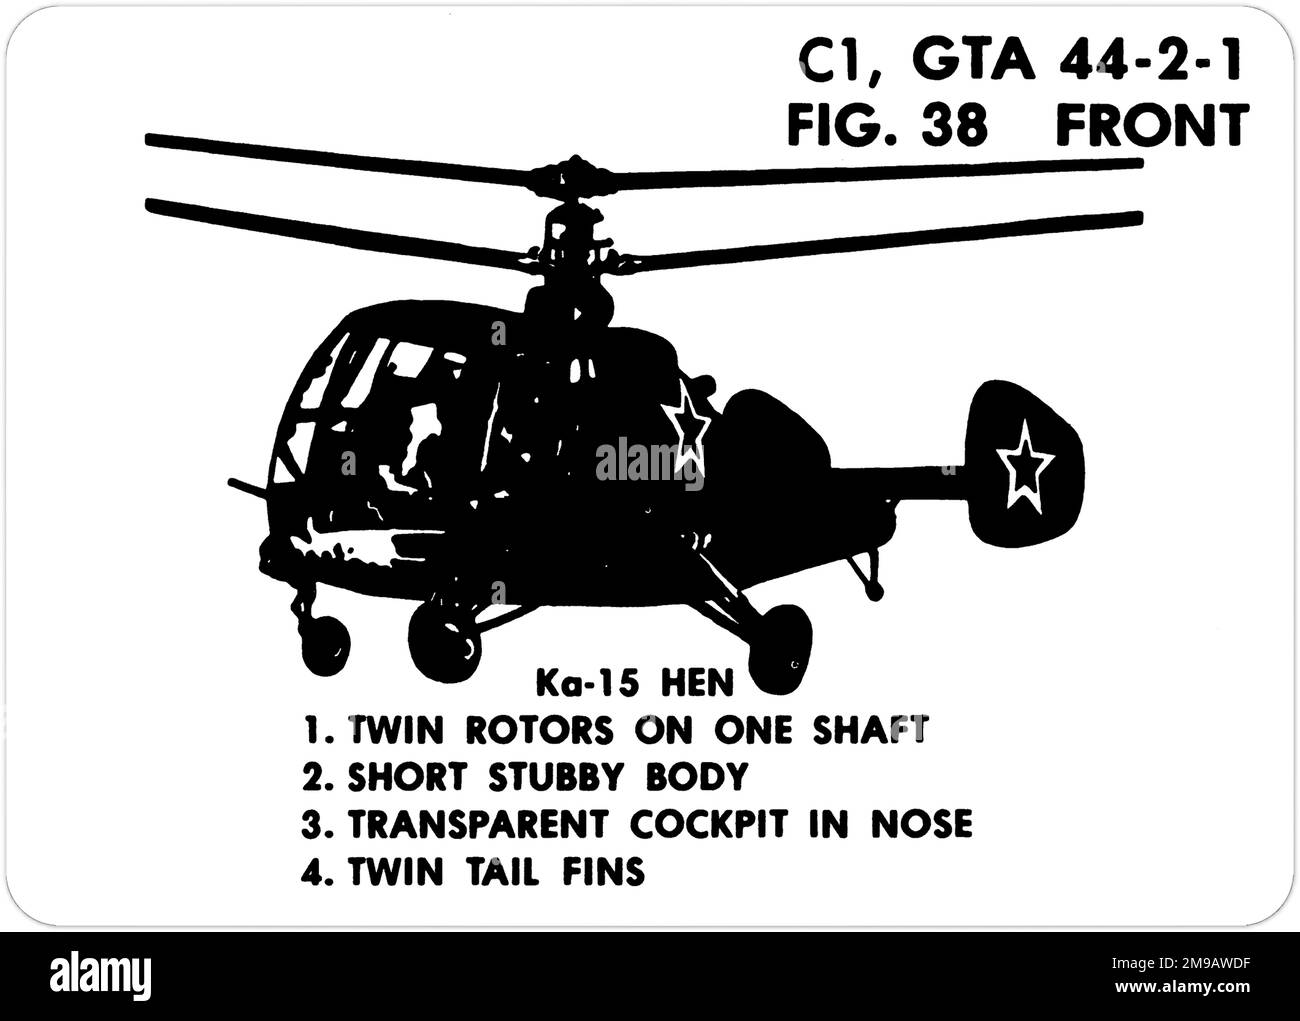 Kamov Ka-15 (NATO codename: Hen). This is one of the series of Graphics Training Aids (GTA) used by the United States Army to train their personnel to recognize friendly and hostile aircraft. This particular set, GTA 44-2-1, was issued in July1977. The set features aircraft from: Canada, Italy, United Kingdom, United States, and the USSR. Stock Photo